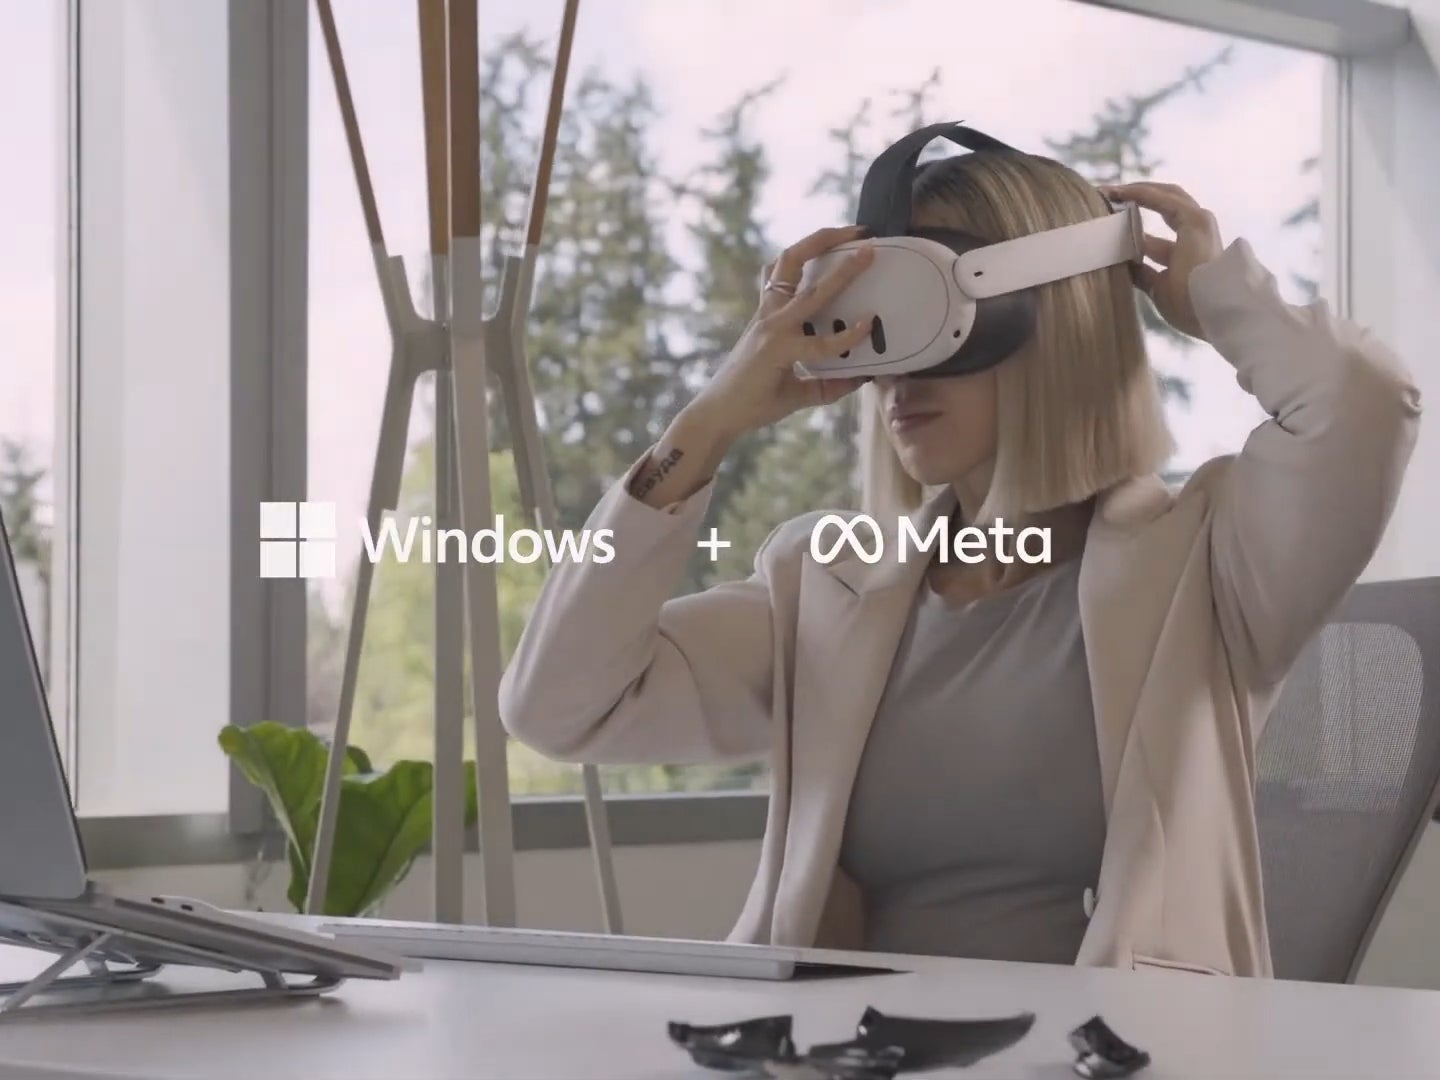 Wear this in the office and procrastinate in private! | Image credit — PhoneArena - Microsoft and Meta are partnering to merge Windows with Quest